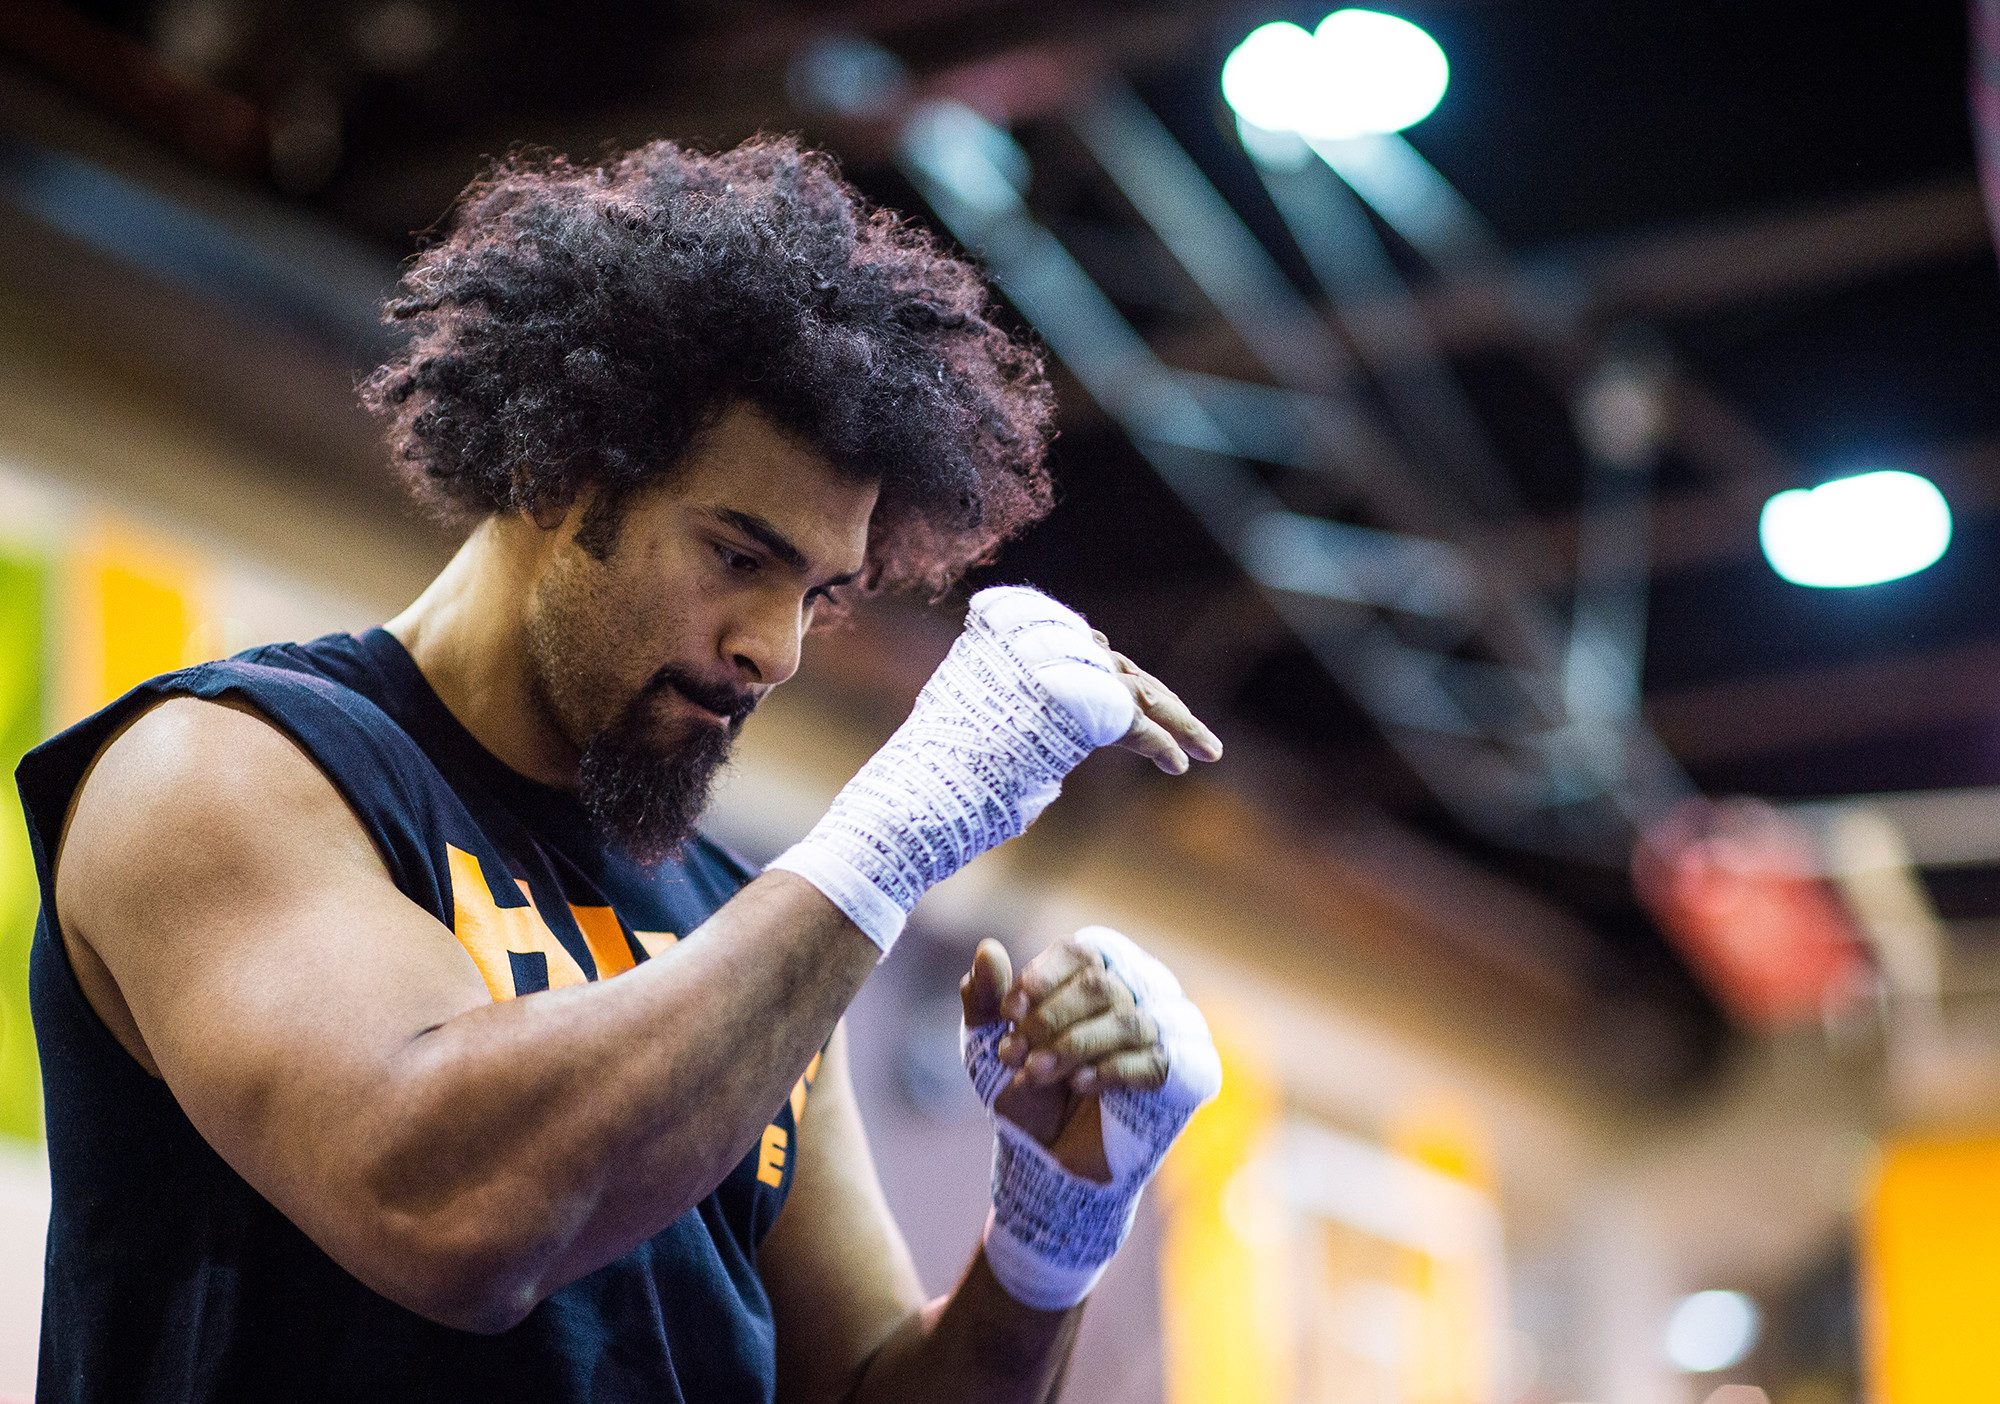 LONDON, ENGLAND - APRIL 12: David Haye takes part in a media work out at Canary Wharf on April 12, 2016 in London, England. Haye will face undefeated Arnold ëThe Cobraí Gjergjaj on Saturday May 21 at the 02 Arena in London. (Photo by Justin Setterfield/Getty Images)